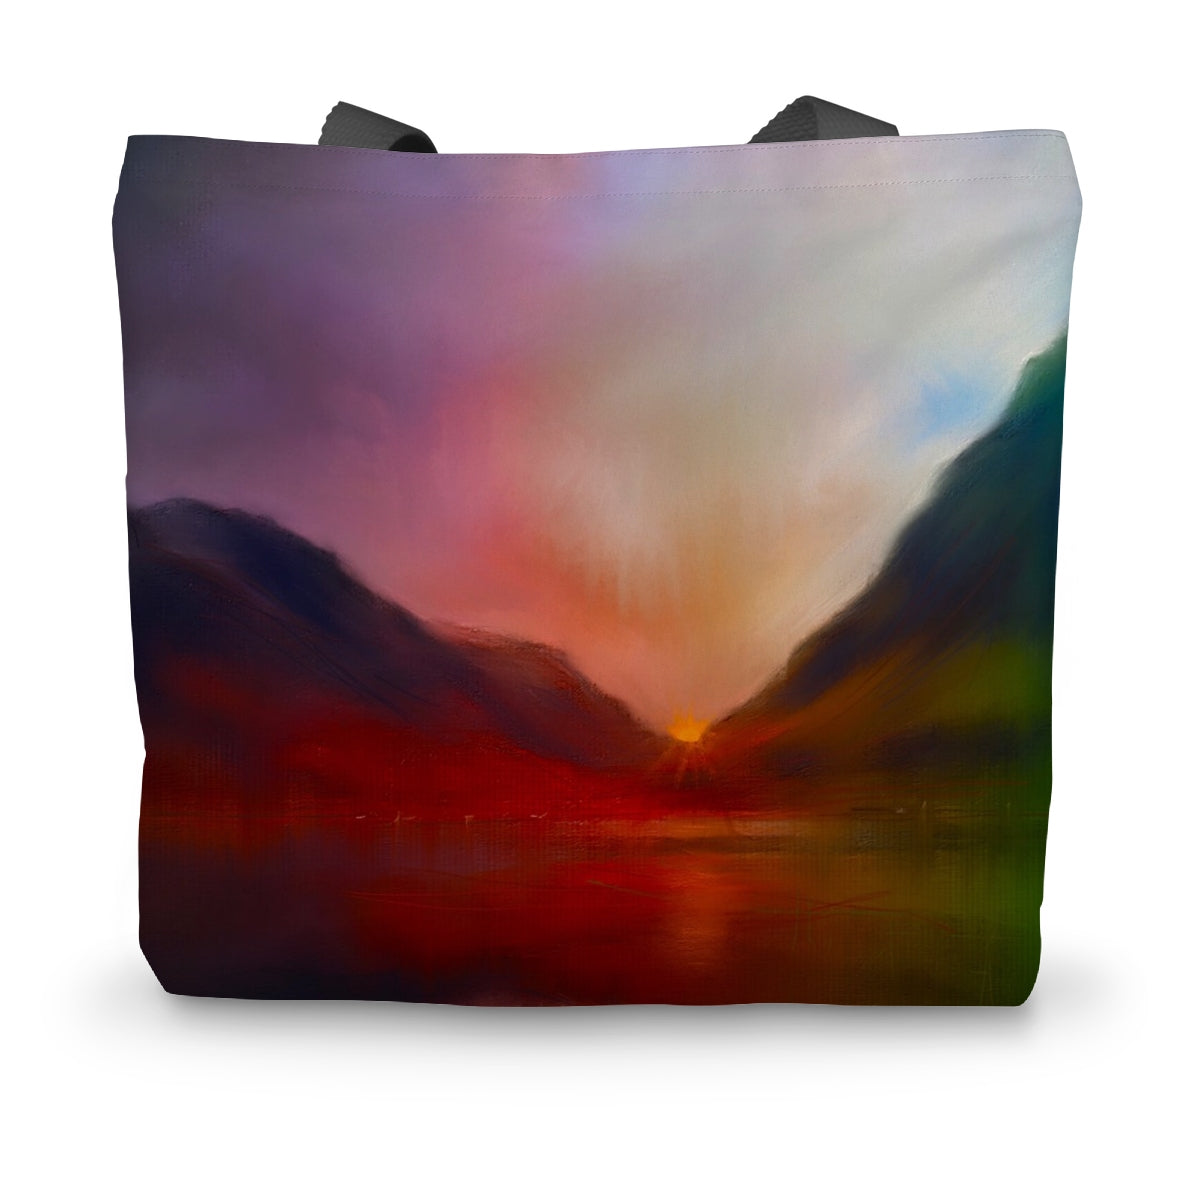 Glencoe Sunset Art Gifts Canvas Tote Bag-Bags-Glencoe Art Gallery-14"x18.5"-Paintings, Prints, Homeware, Art Gifts From Scotland By Scottish Artist Kevin Hunter